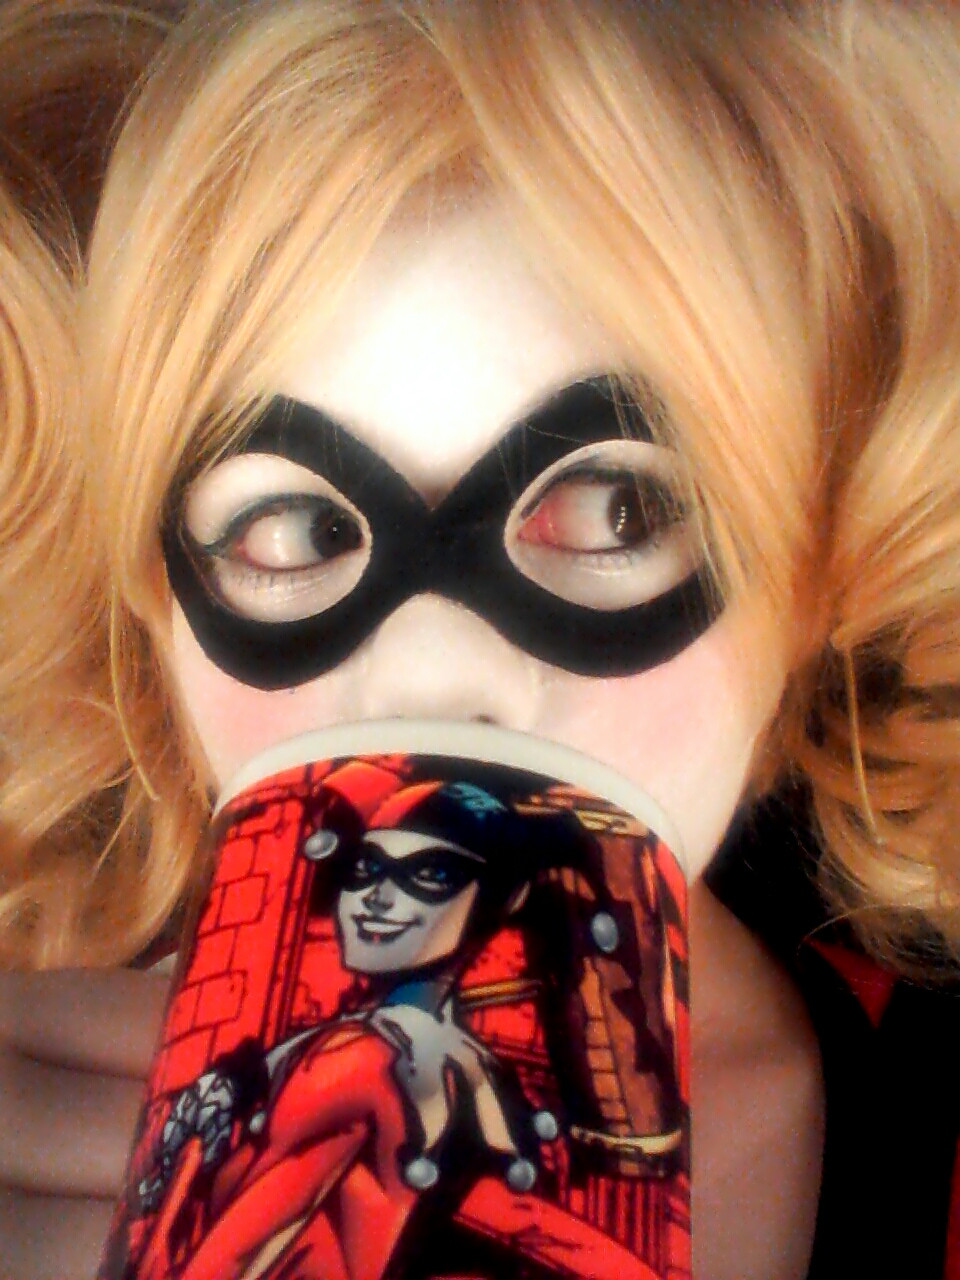 What Do You Think Of This Harley Quinn Sho